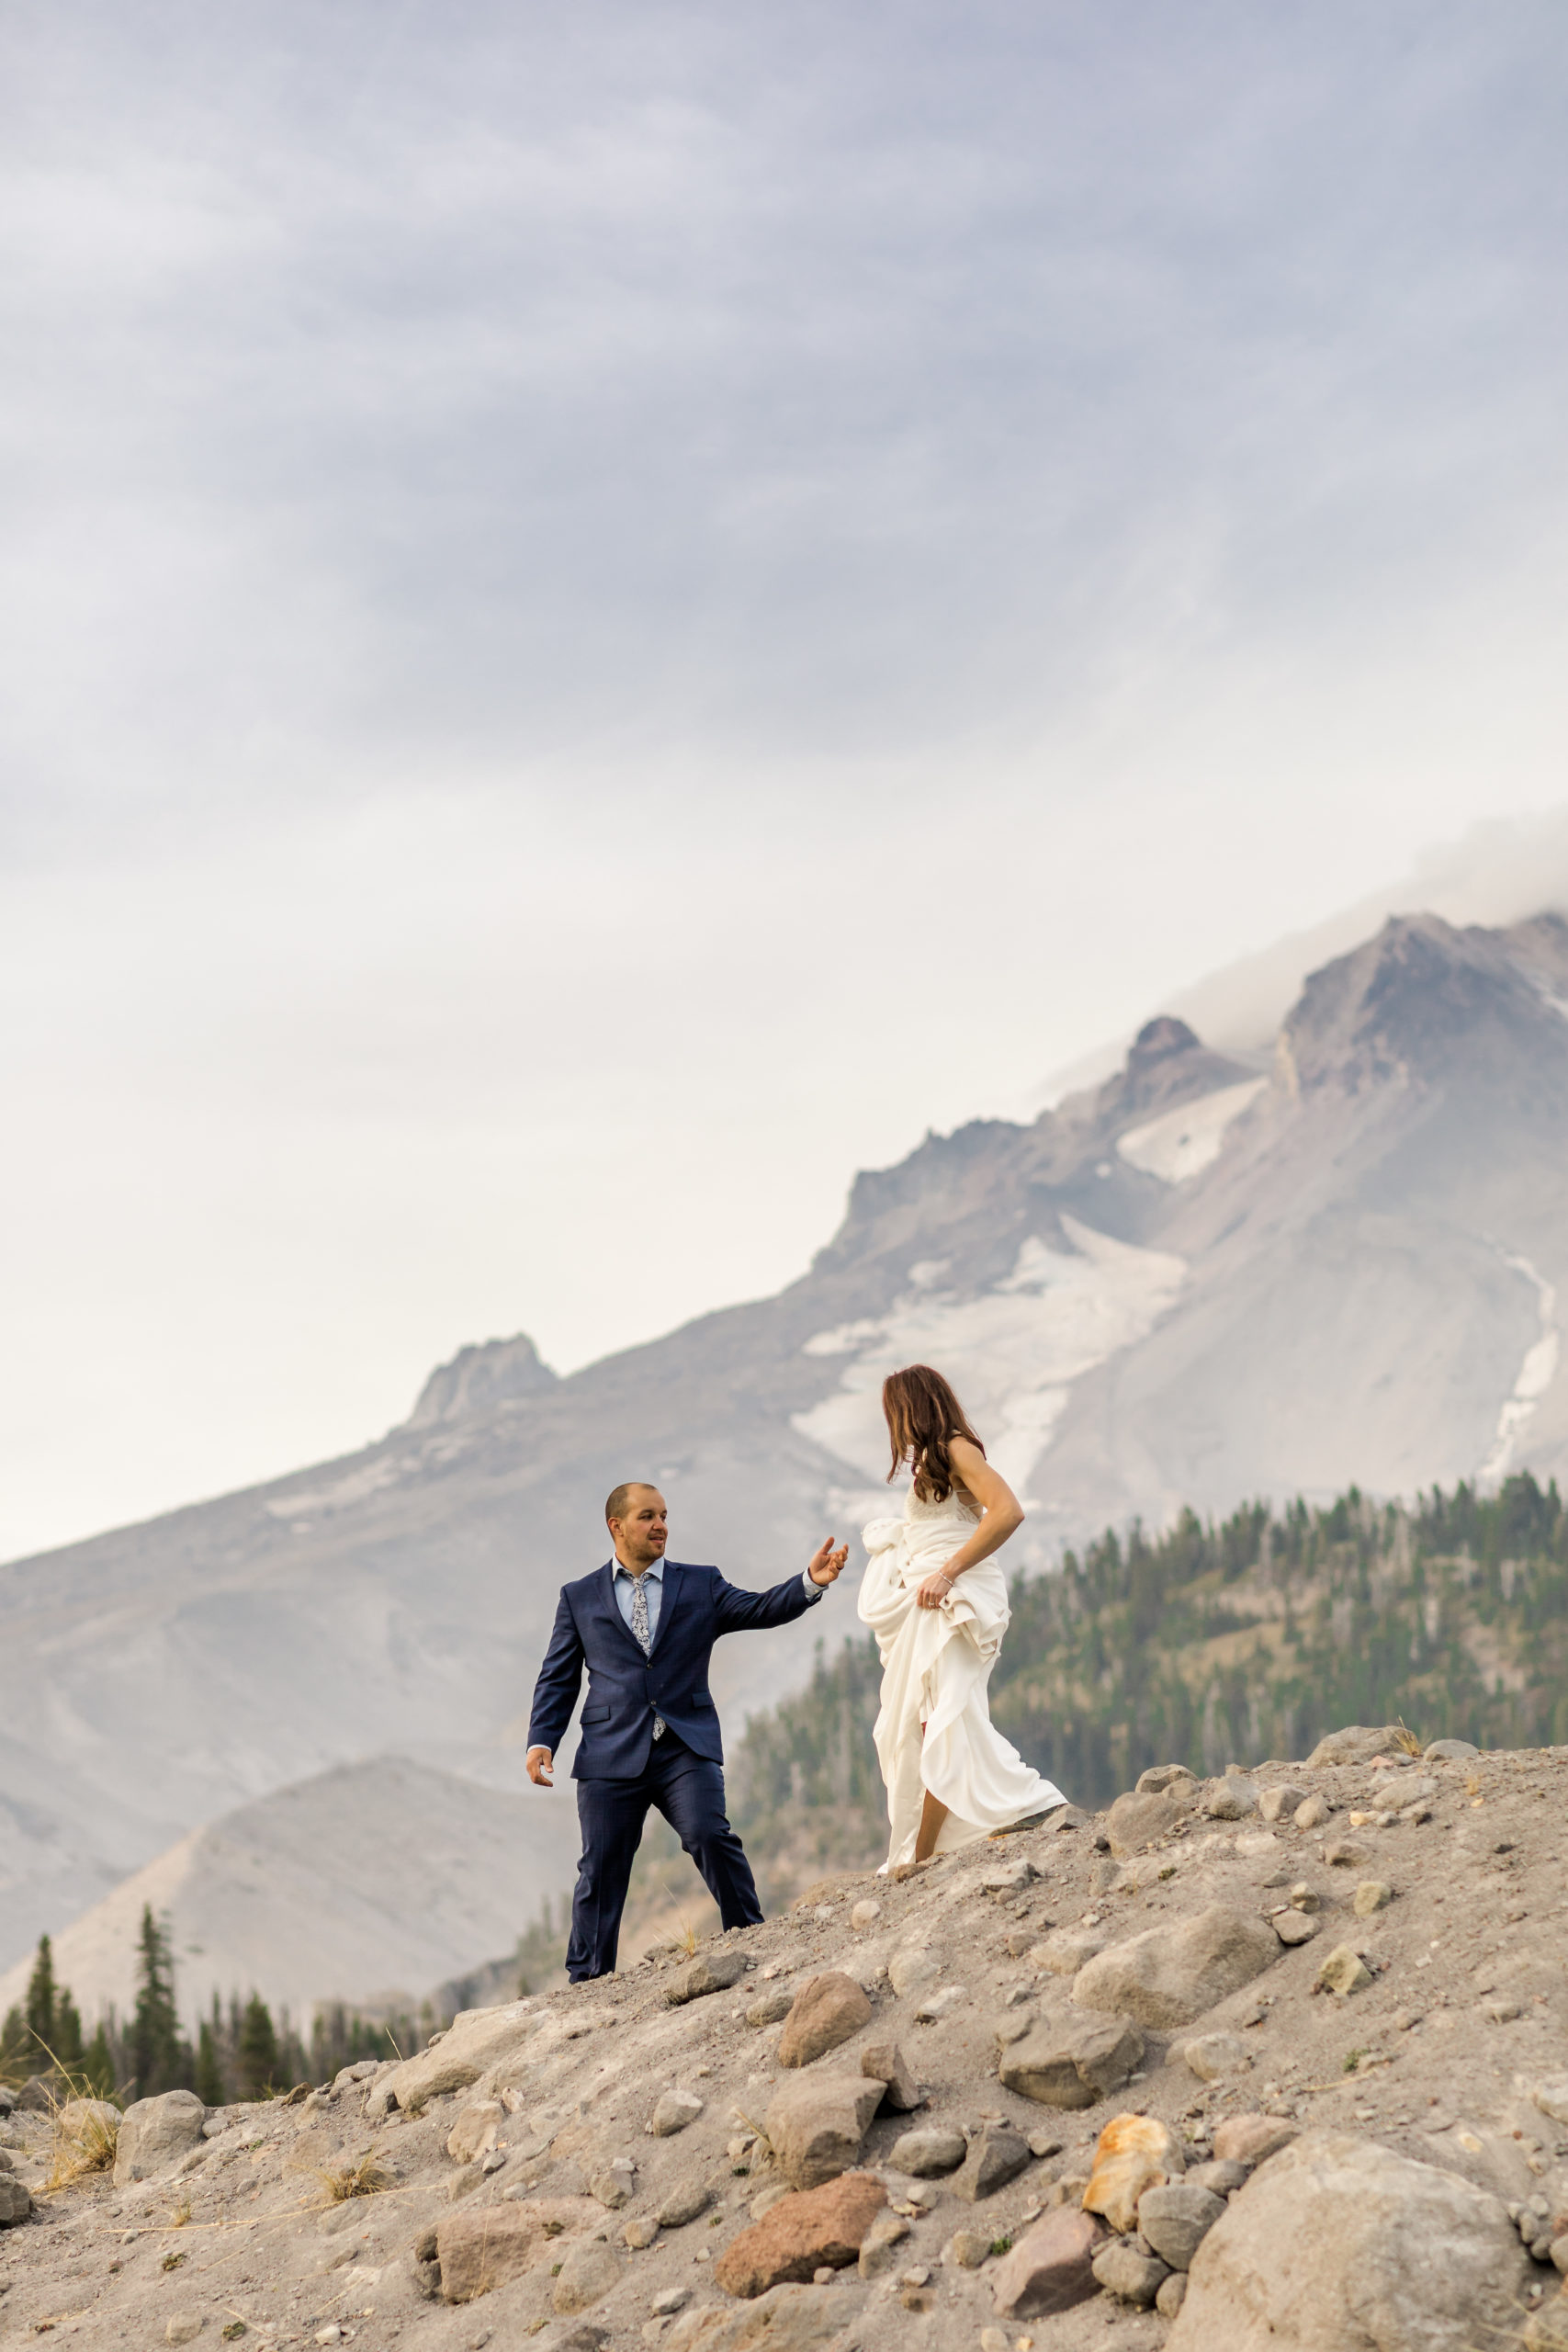 things you should know before dress shopping, oregon wedding photographer, oregon elopement photographer, pnw elopement photographer, dress shopping, wedding advice, wedding tips, dress shopping tips, brogan marie photography